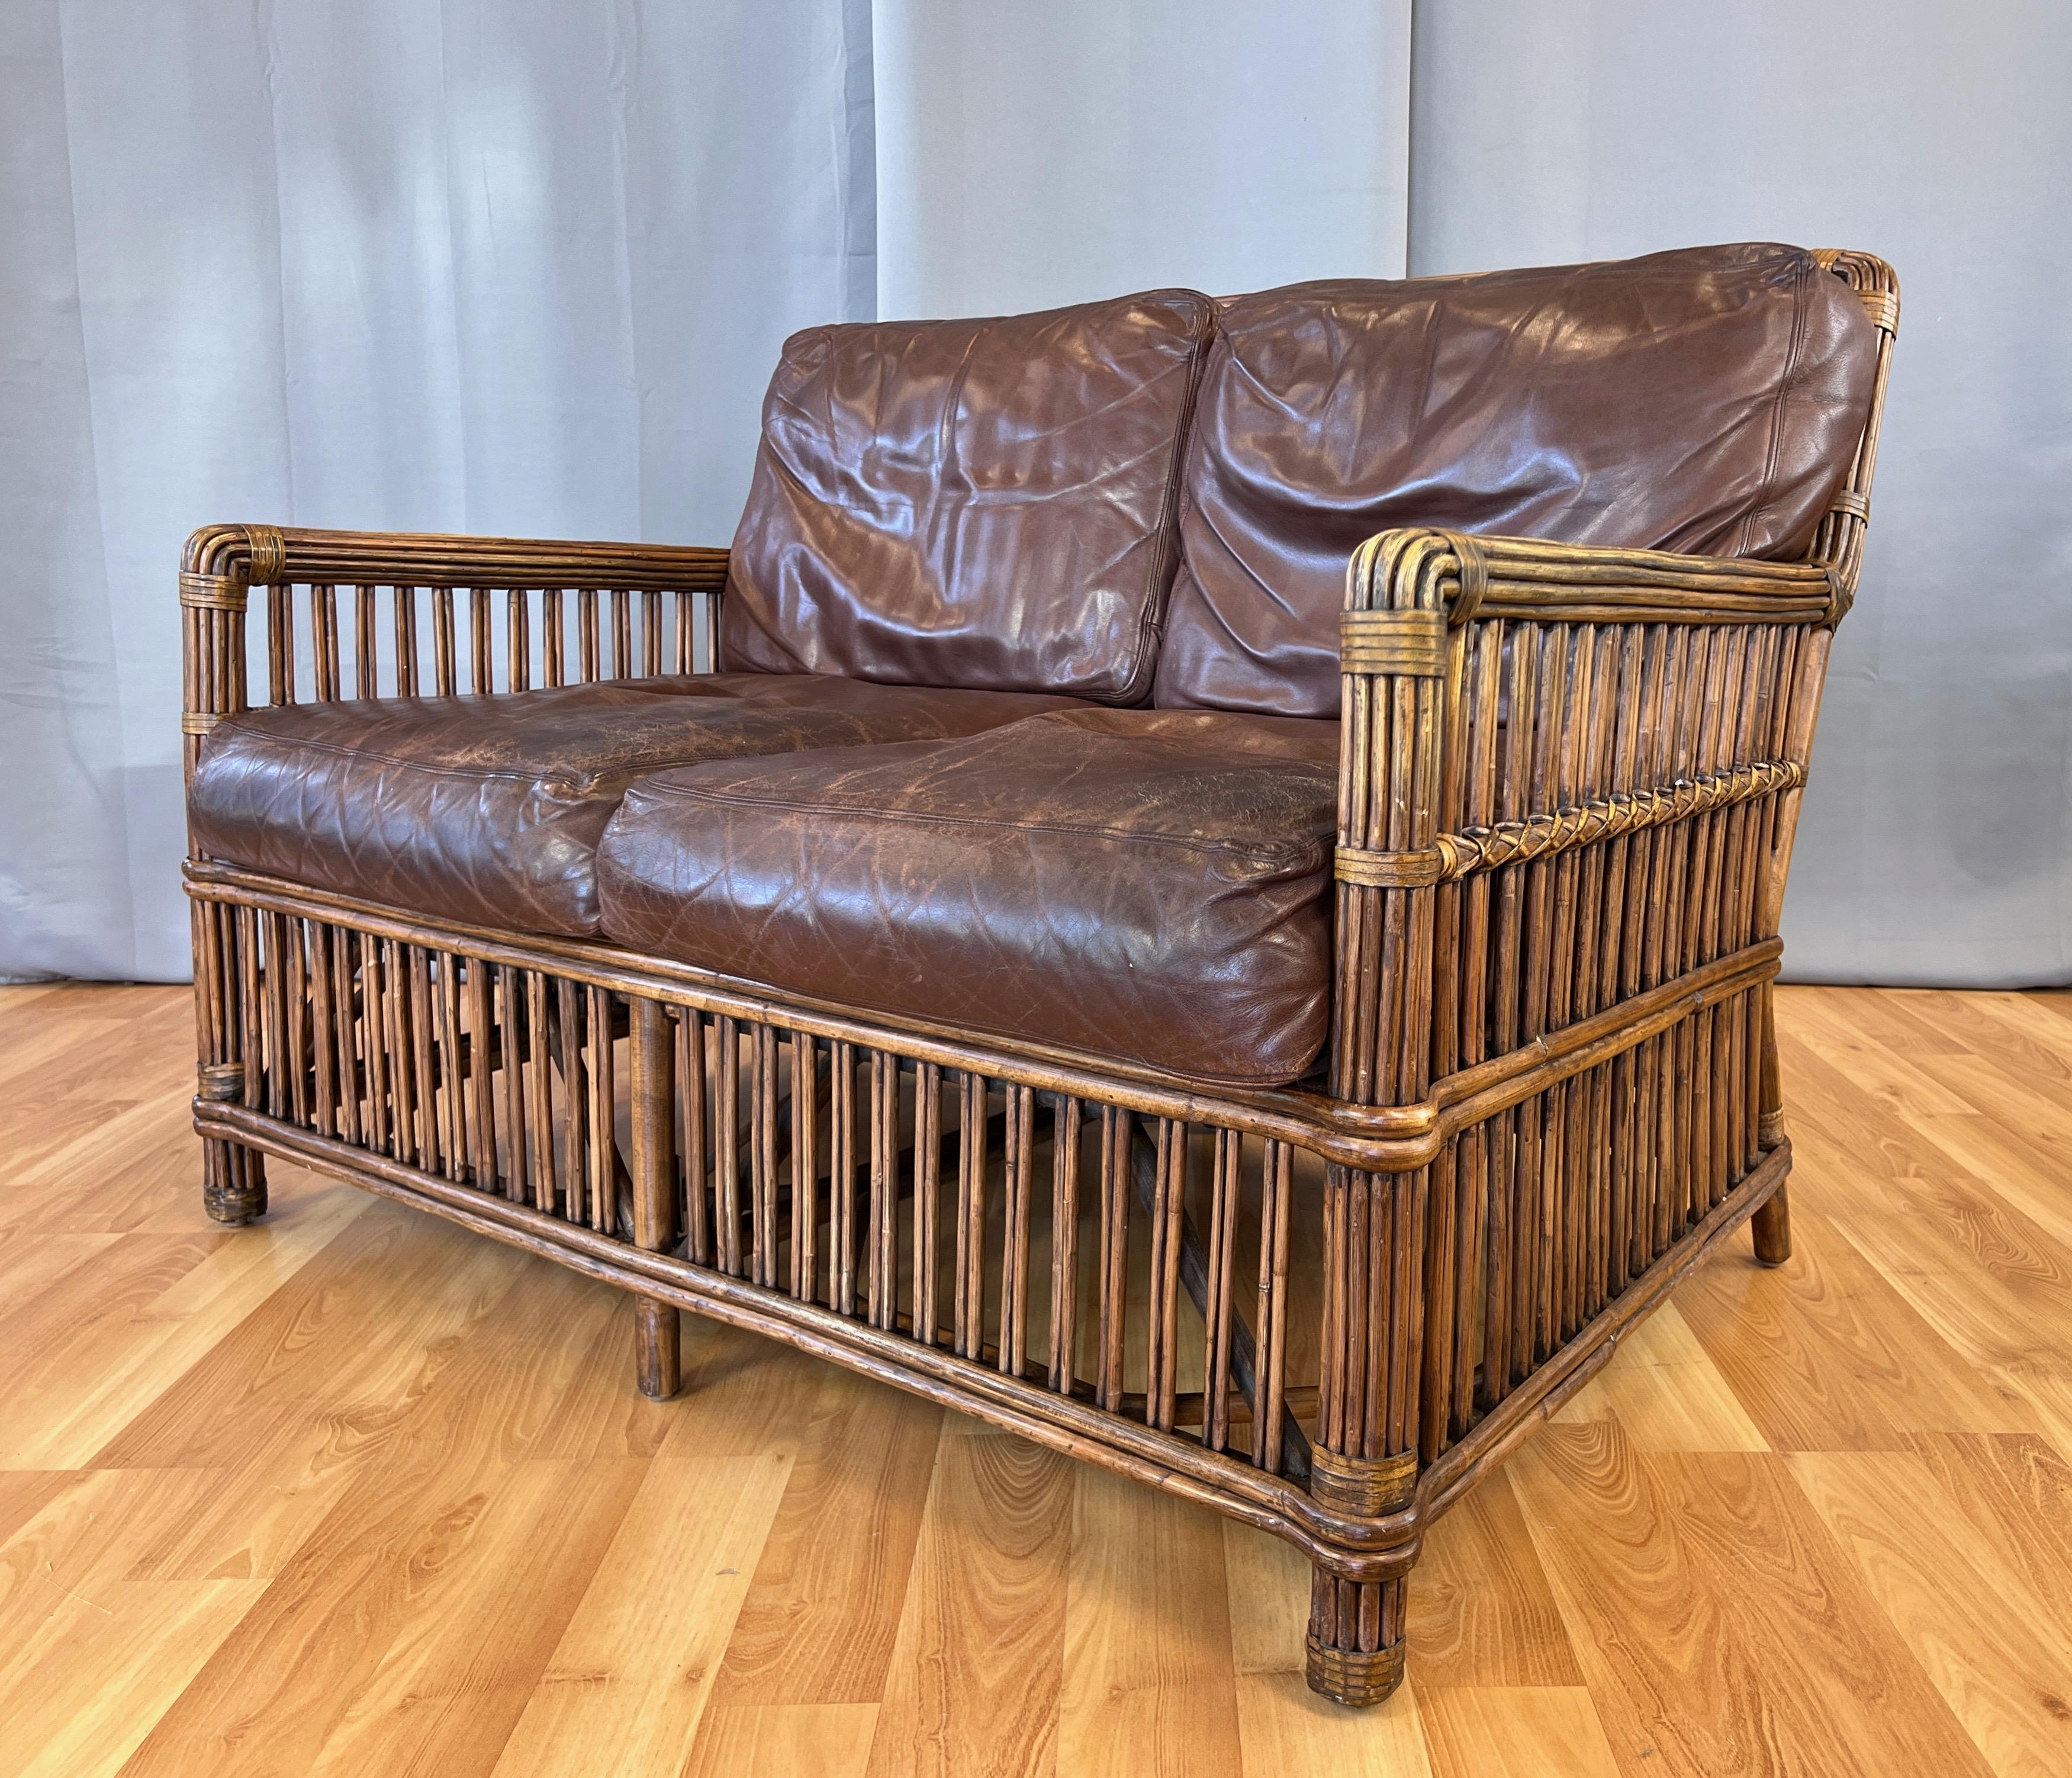 A very handsome and hard to find earlier version of Palecek’s Art Deco-style rattan and leather President’s loveseat or two-person sofa. 

Unlike the currently available version that has integrated magazine racks and cupholders on the arms, this